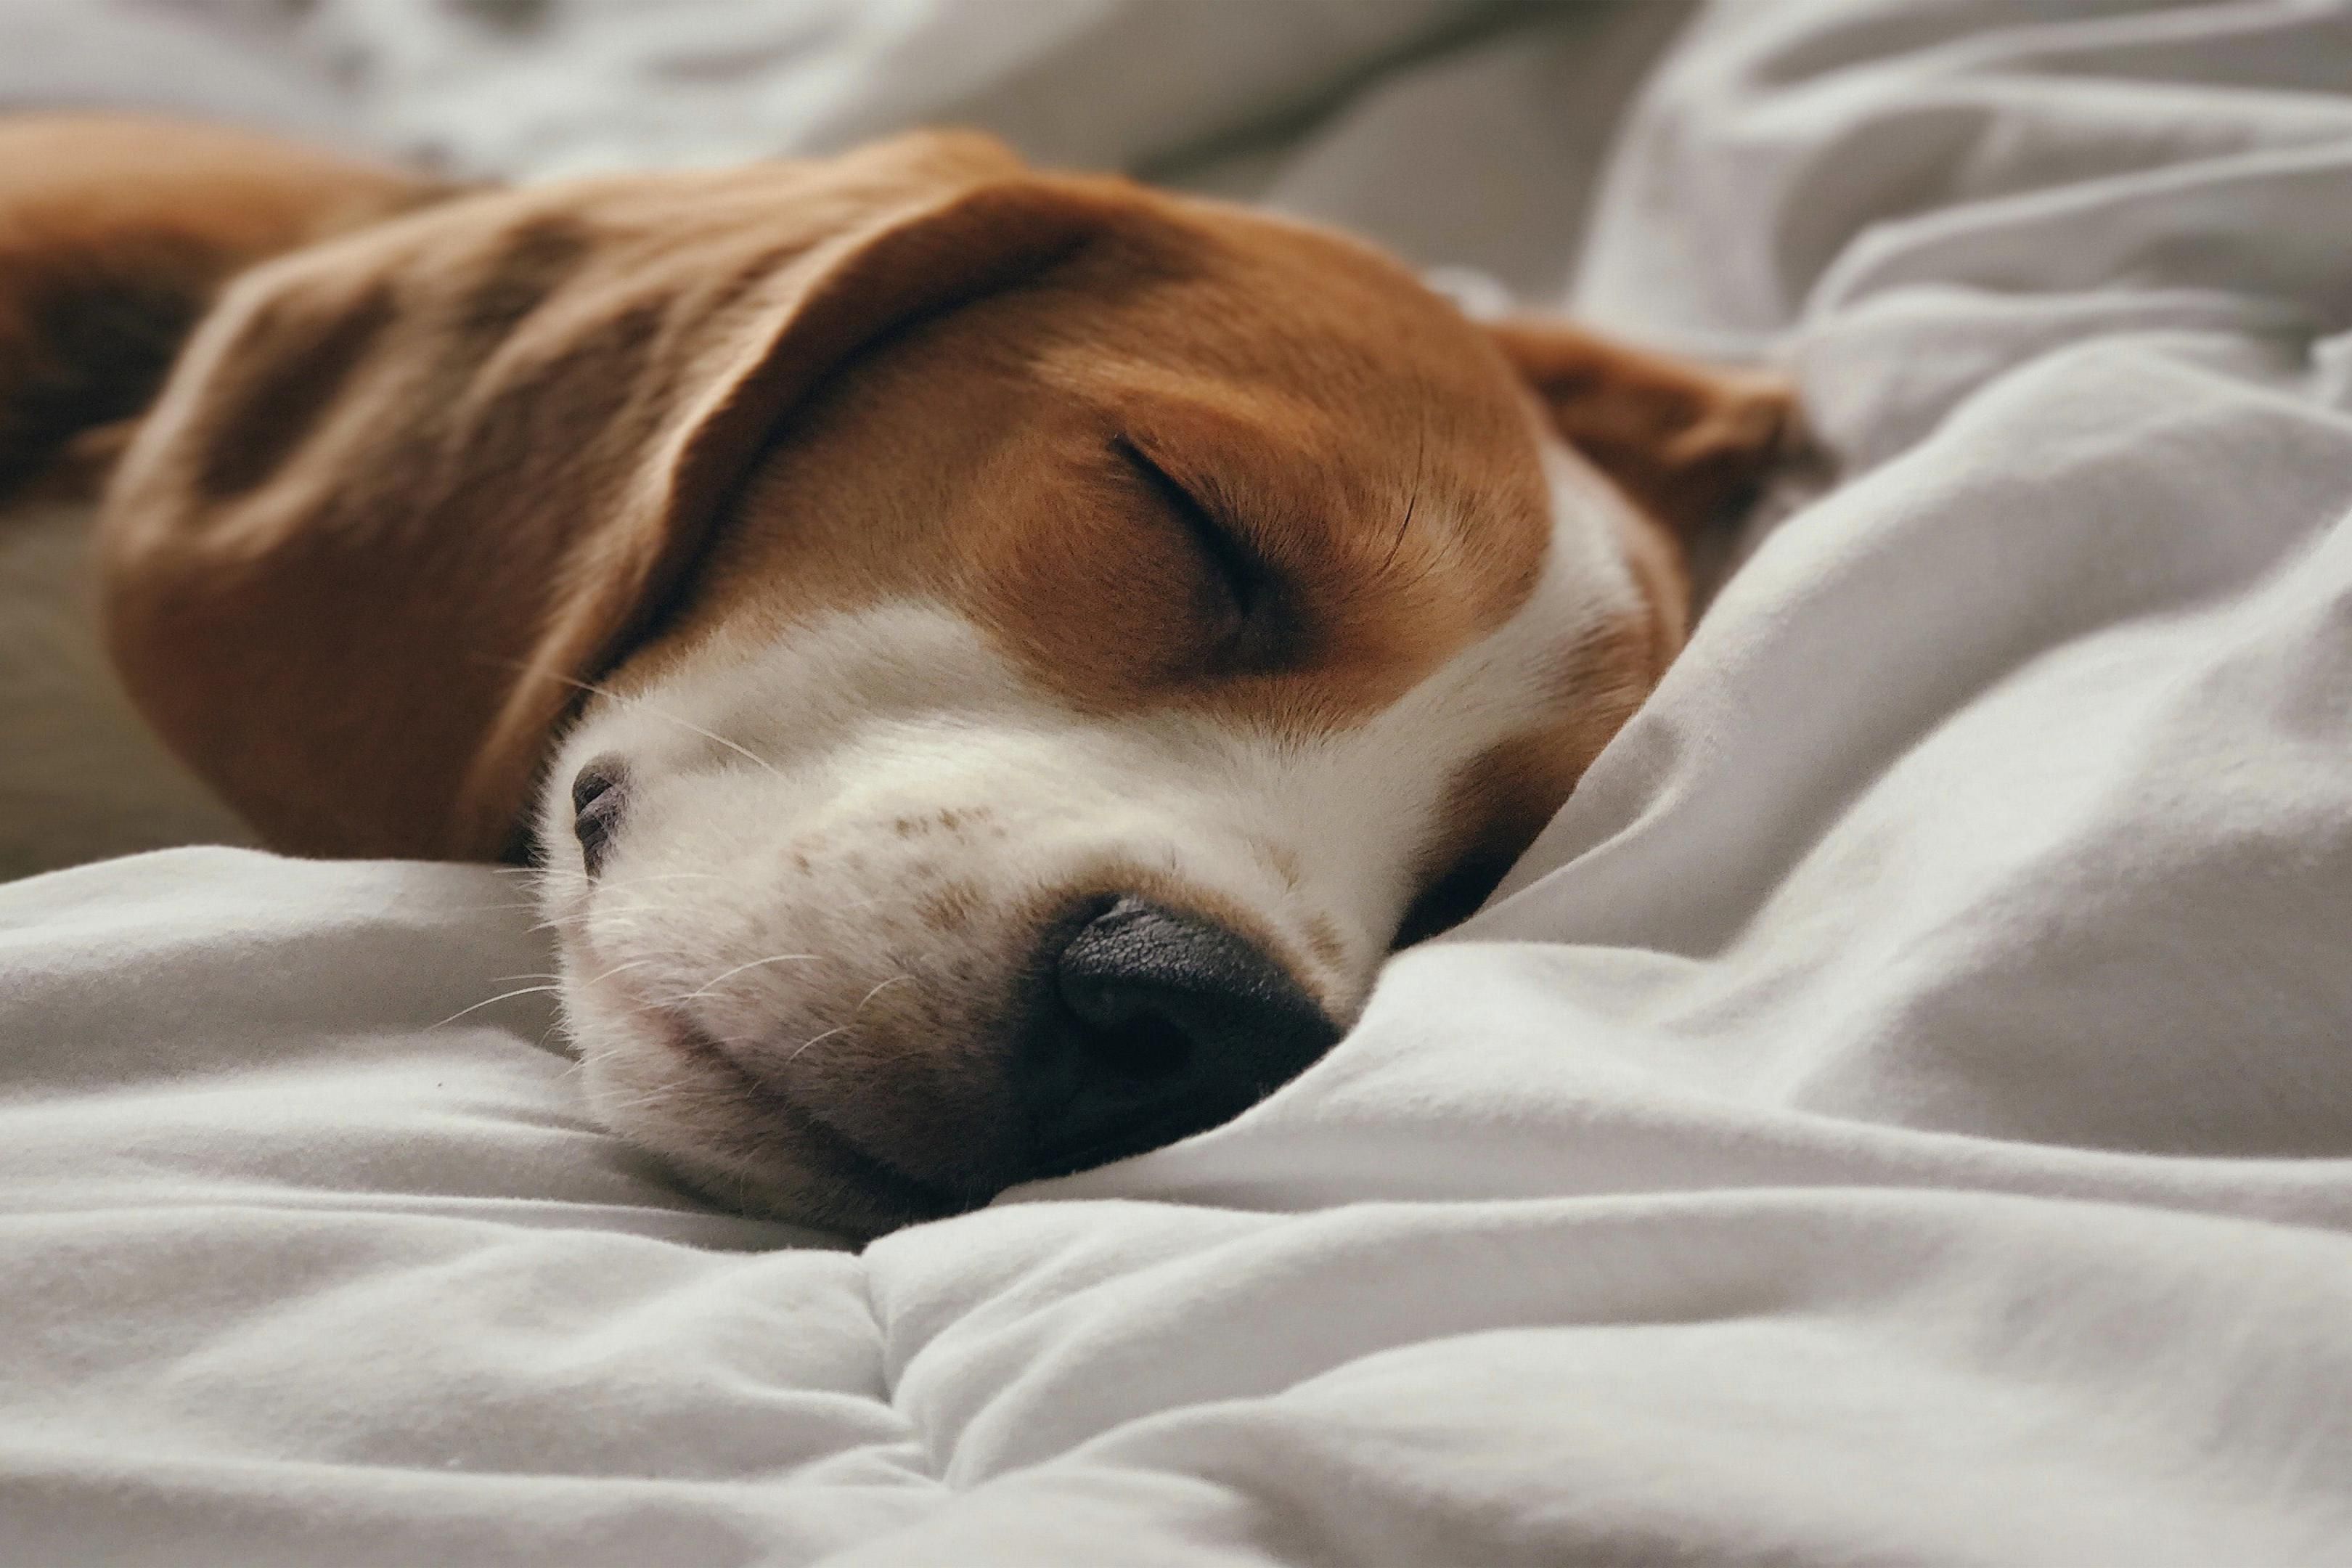 The Hotel Indigo Boston Garden is pet friendly! We welcome pets of all shapes and sizes so you and your best friend can explore Boston together!